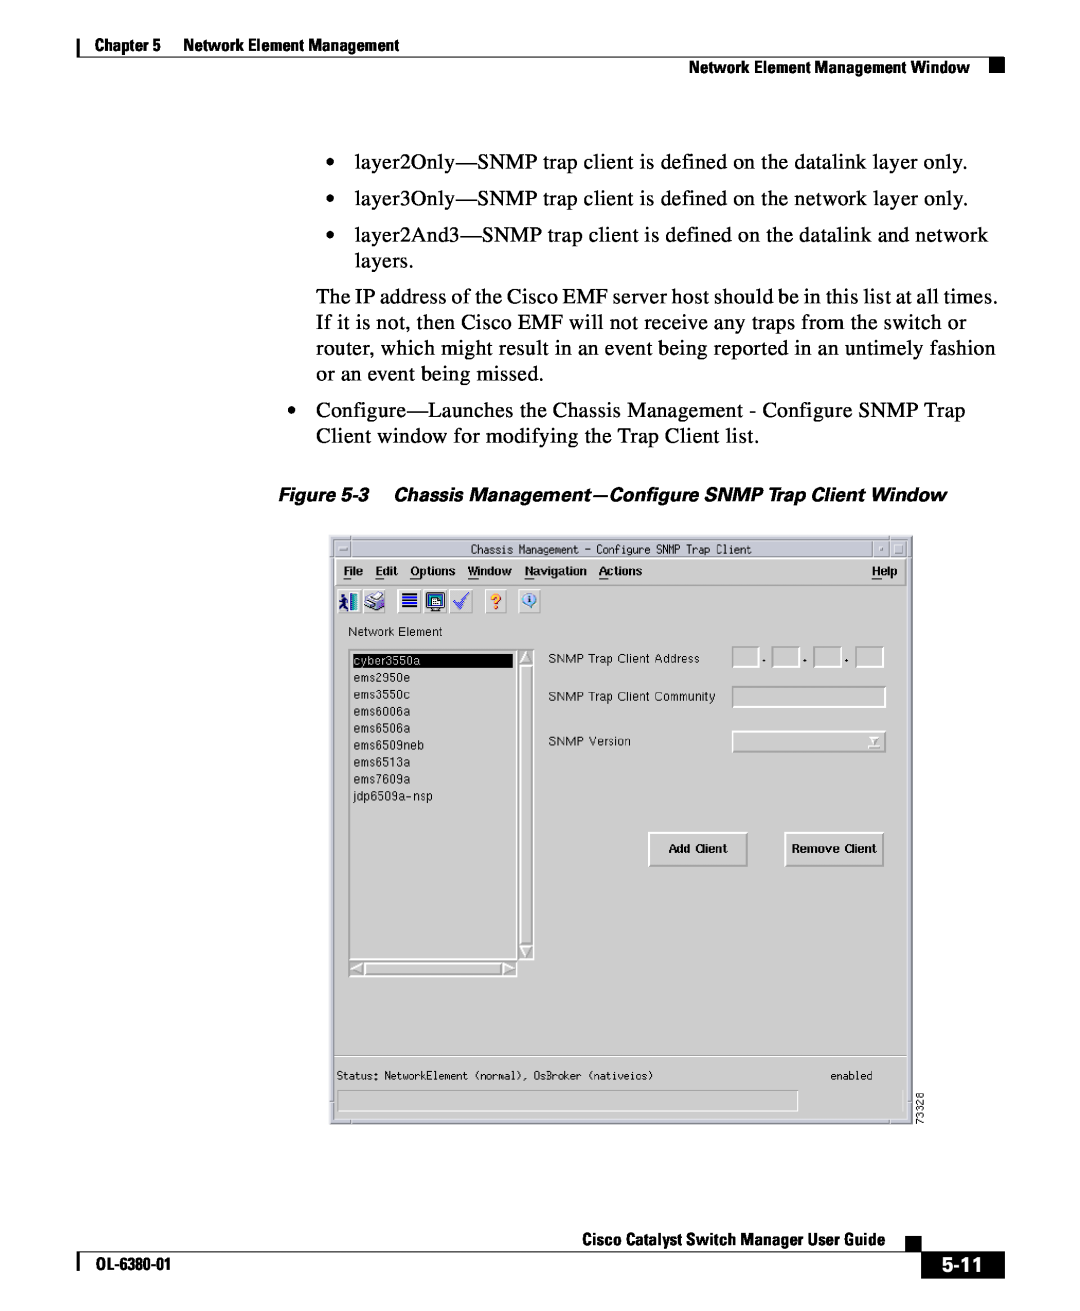 Cisco Systems OL-6380-01 manual 5-11, layer2Only-SNMP trap client is defined on the datalink layer only 